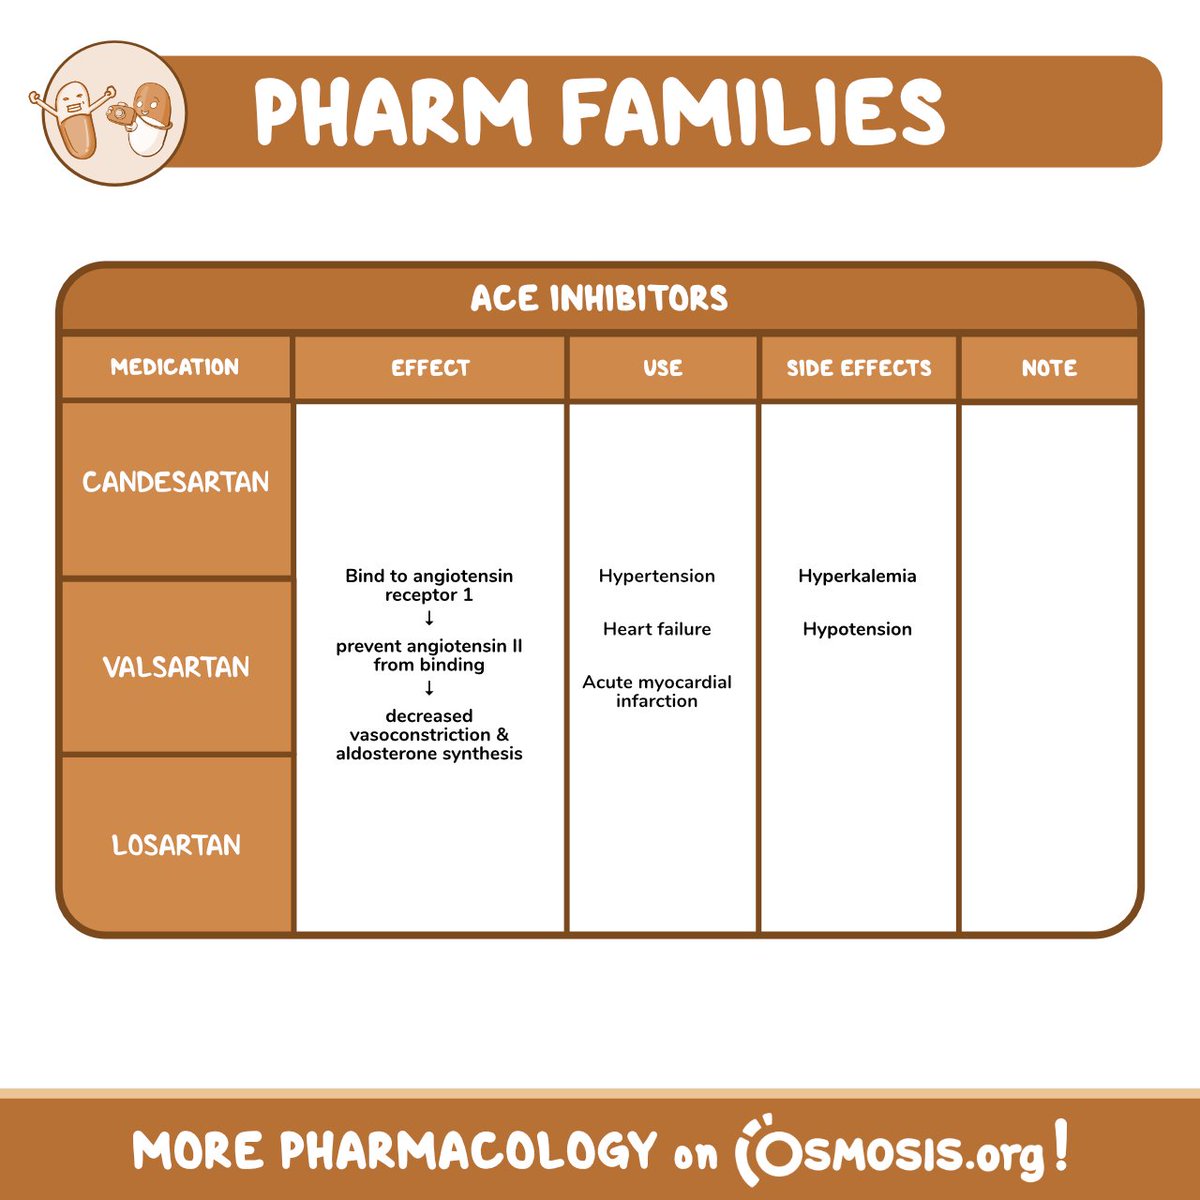 Today's #PharmFamilies is on ARBs (angiotensin II receptor blockers), which are antihypertensives. They bind to angiotensin receptor 1 on vascular smooth muscles and adrenal glands, preventing angiotensin II from binding.

Learn more: osms.it/pharm-arbs-tw